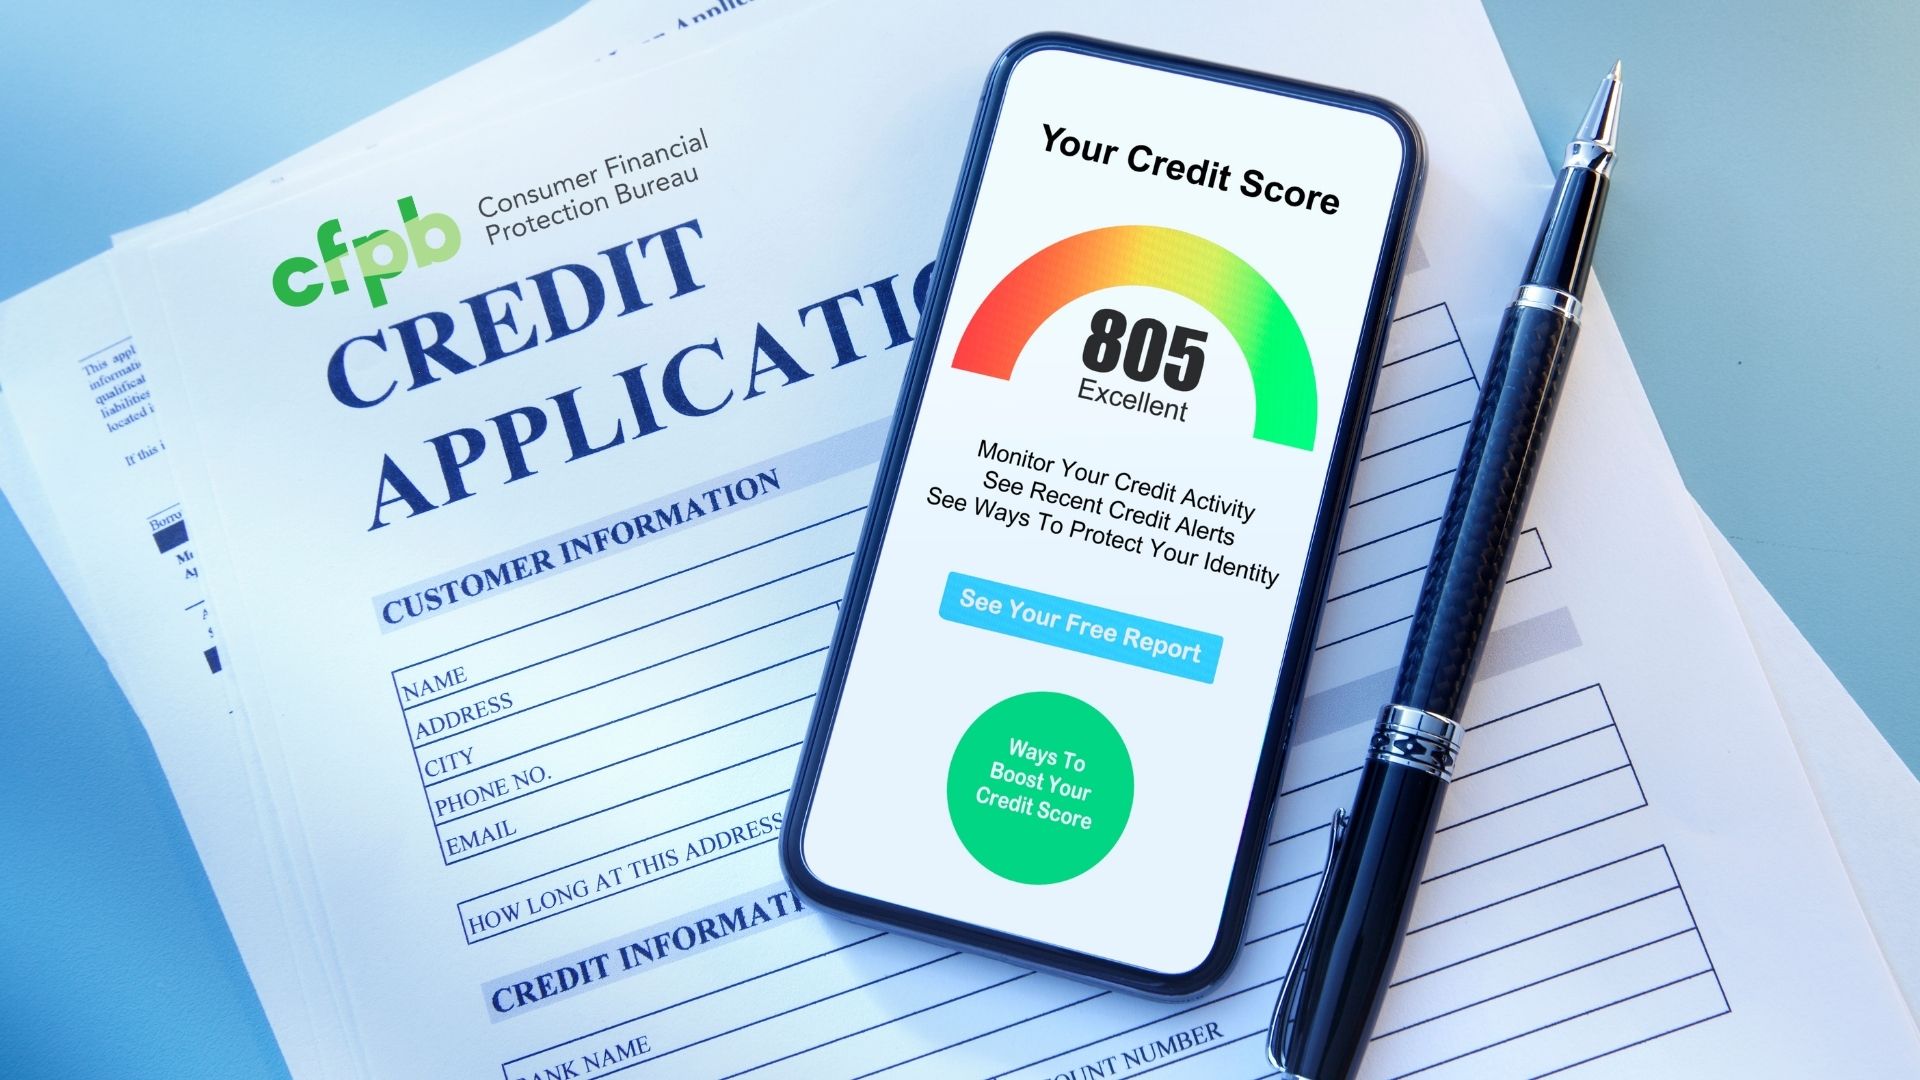 CFPB: Borrowers Entitled to Explanation for Credit Denial, Even if Credit Decisions are Based on Complex Algorithms